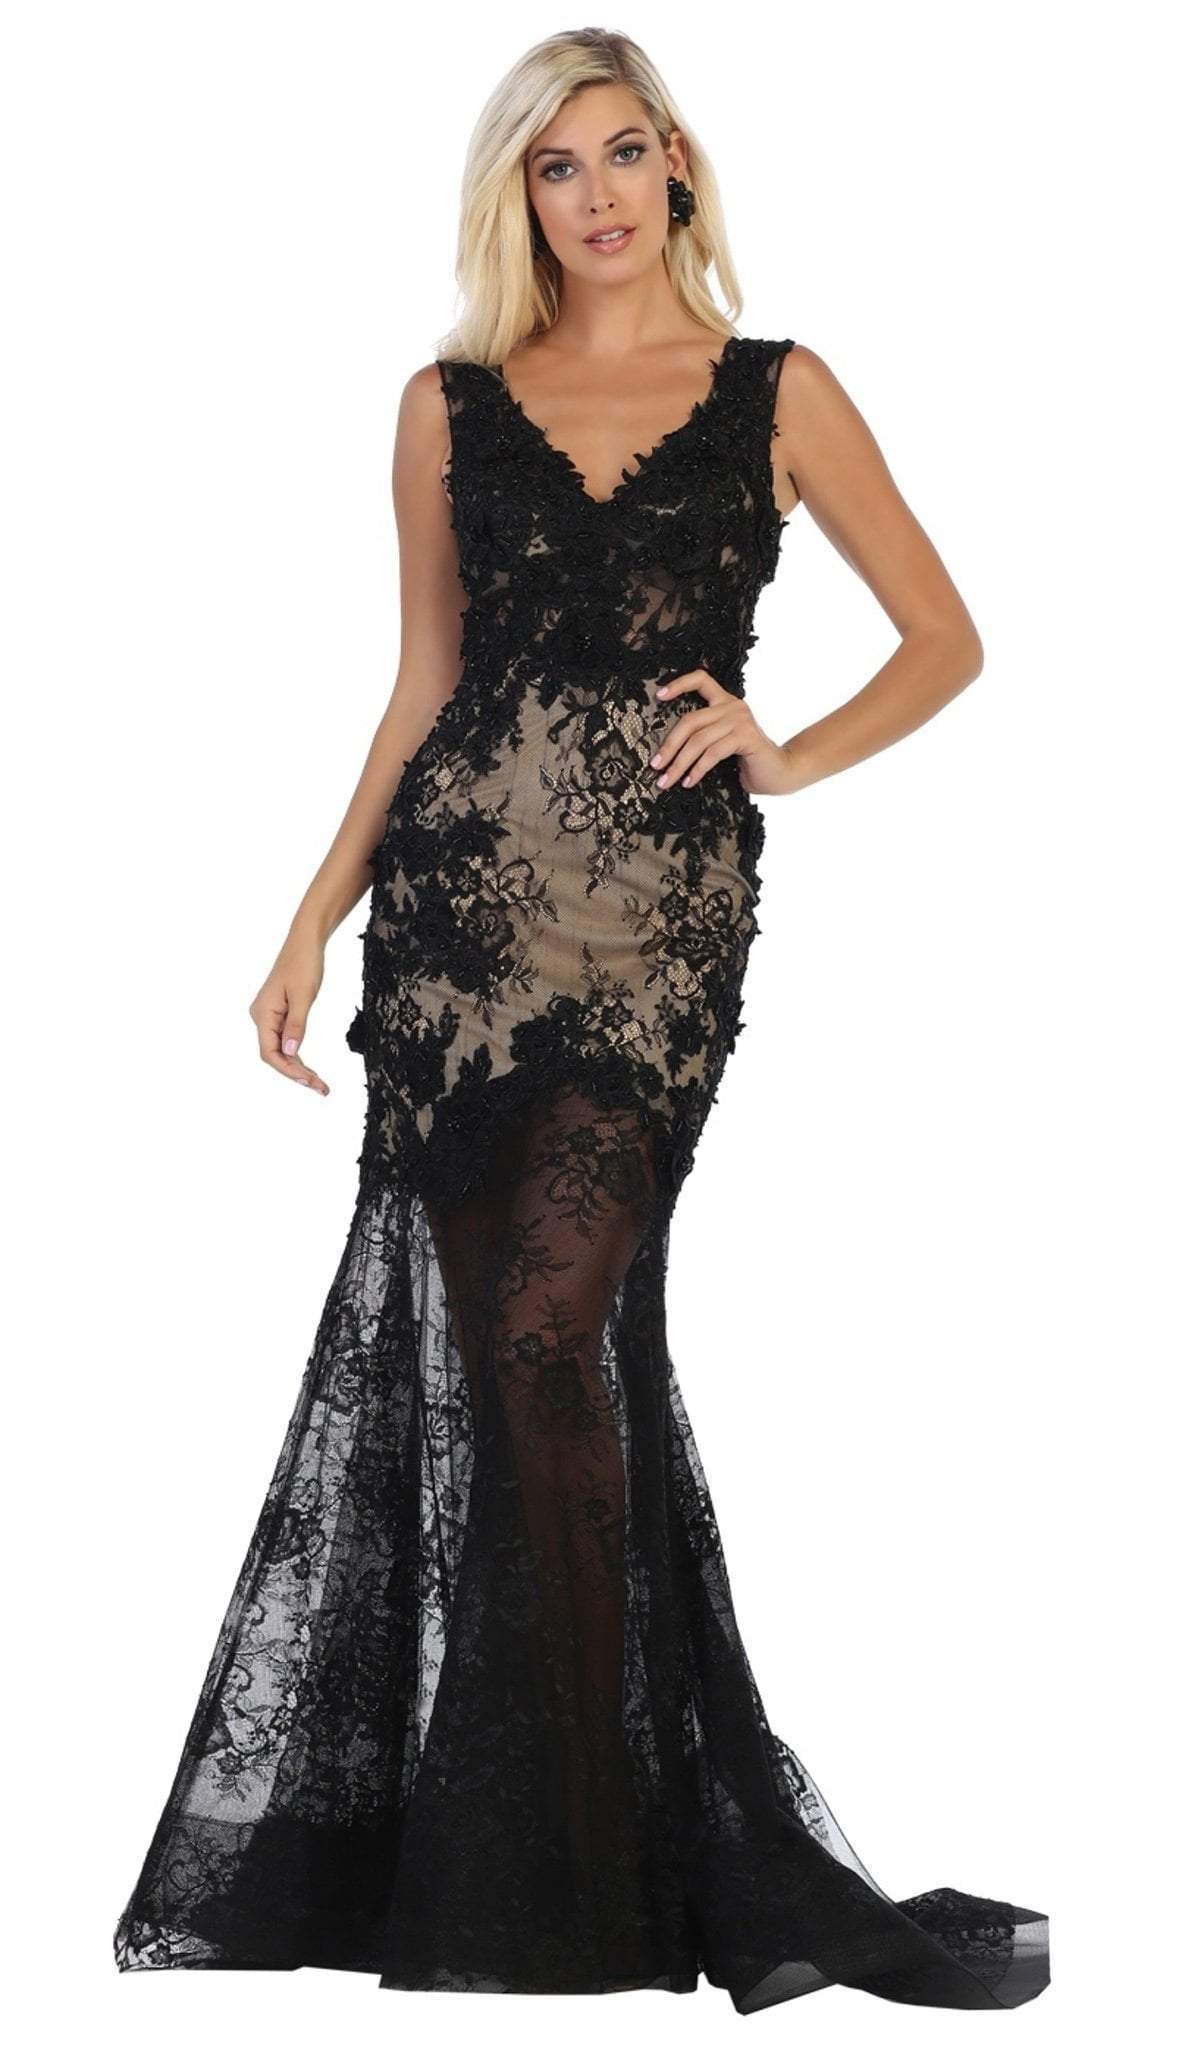 May Queen - RQ7687 Lace Applique V-neck Trumpet Dress Special Occasion Dress 4 / Black/Nude